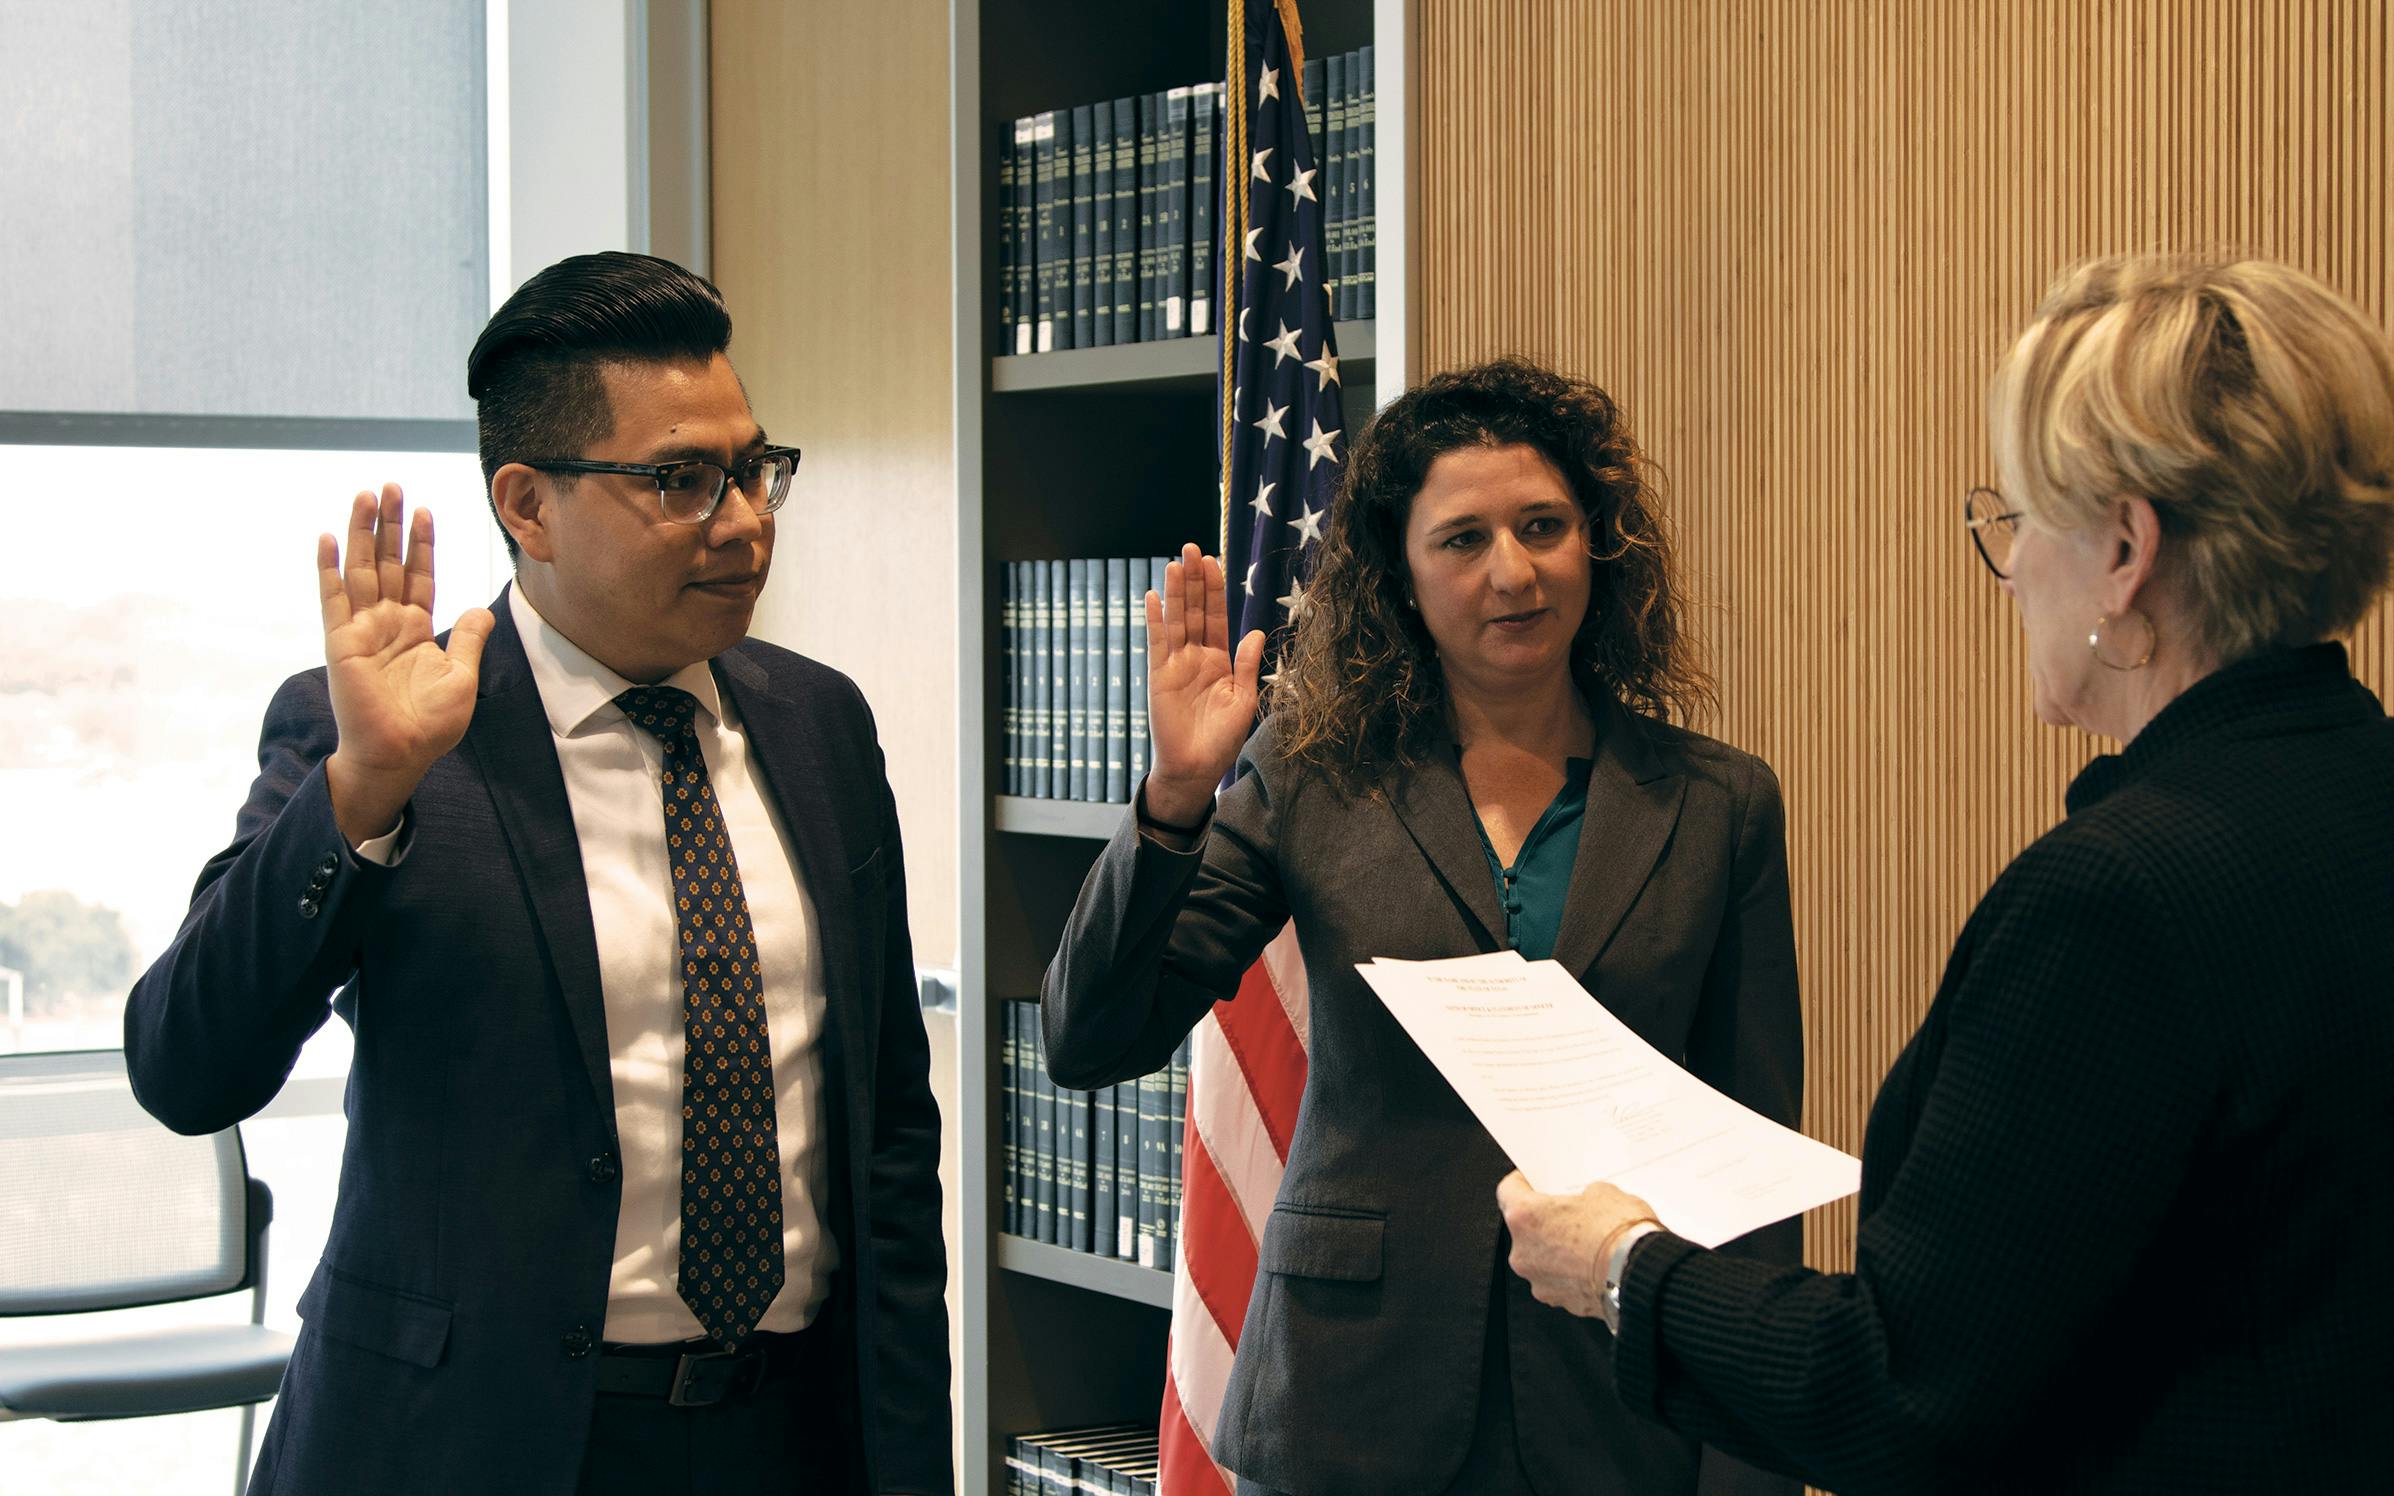 District Attorney Margaret Moore (far right) swearing in Villalobos (left) and fellow lawyer Gwen Jacobs in Austin on December 16, 2019.